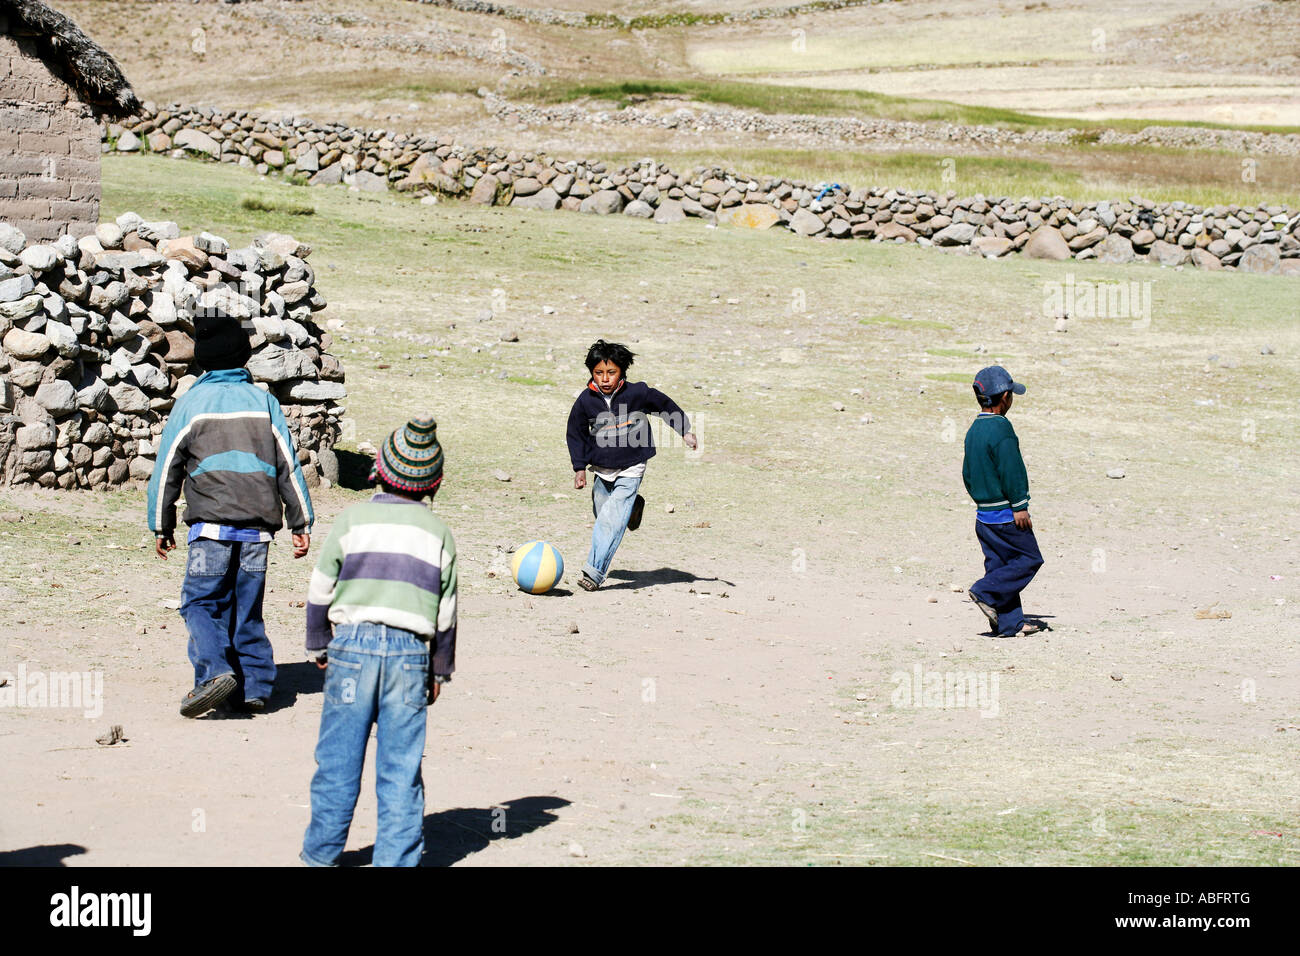 The annual intervillage fist fighting festival known as Tinku in Macha Bolivia. Stock Photo